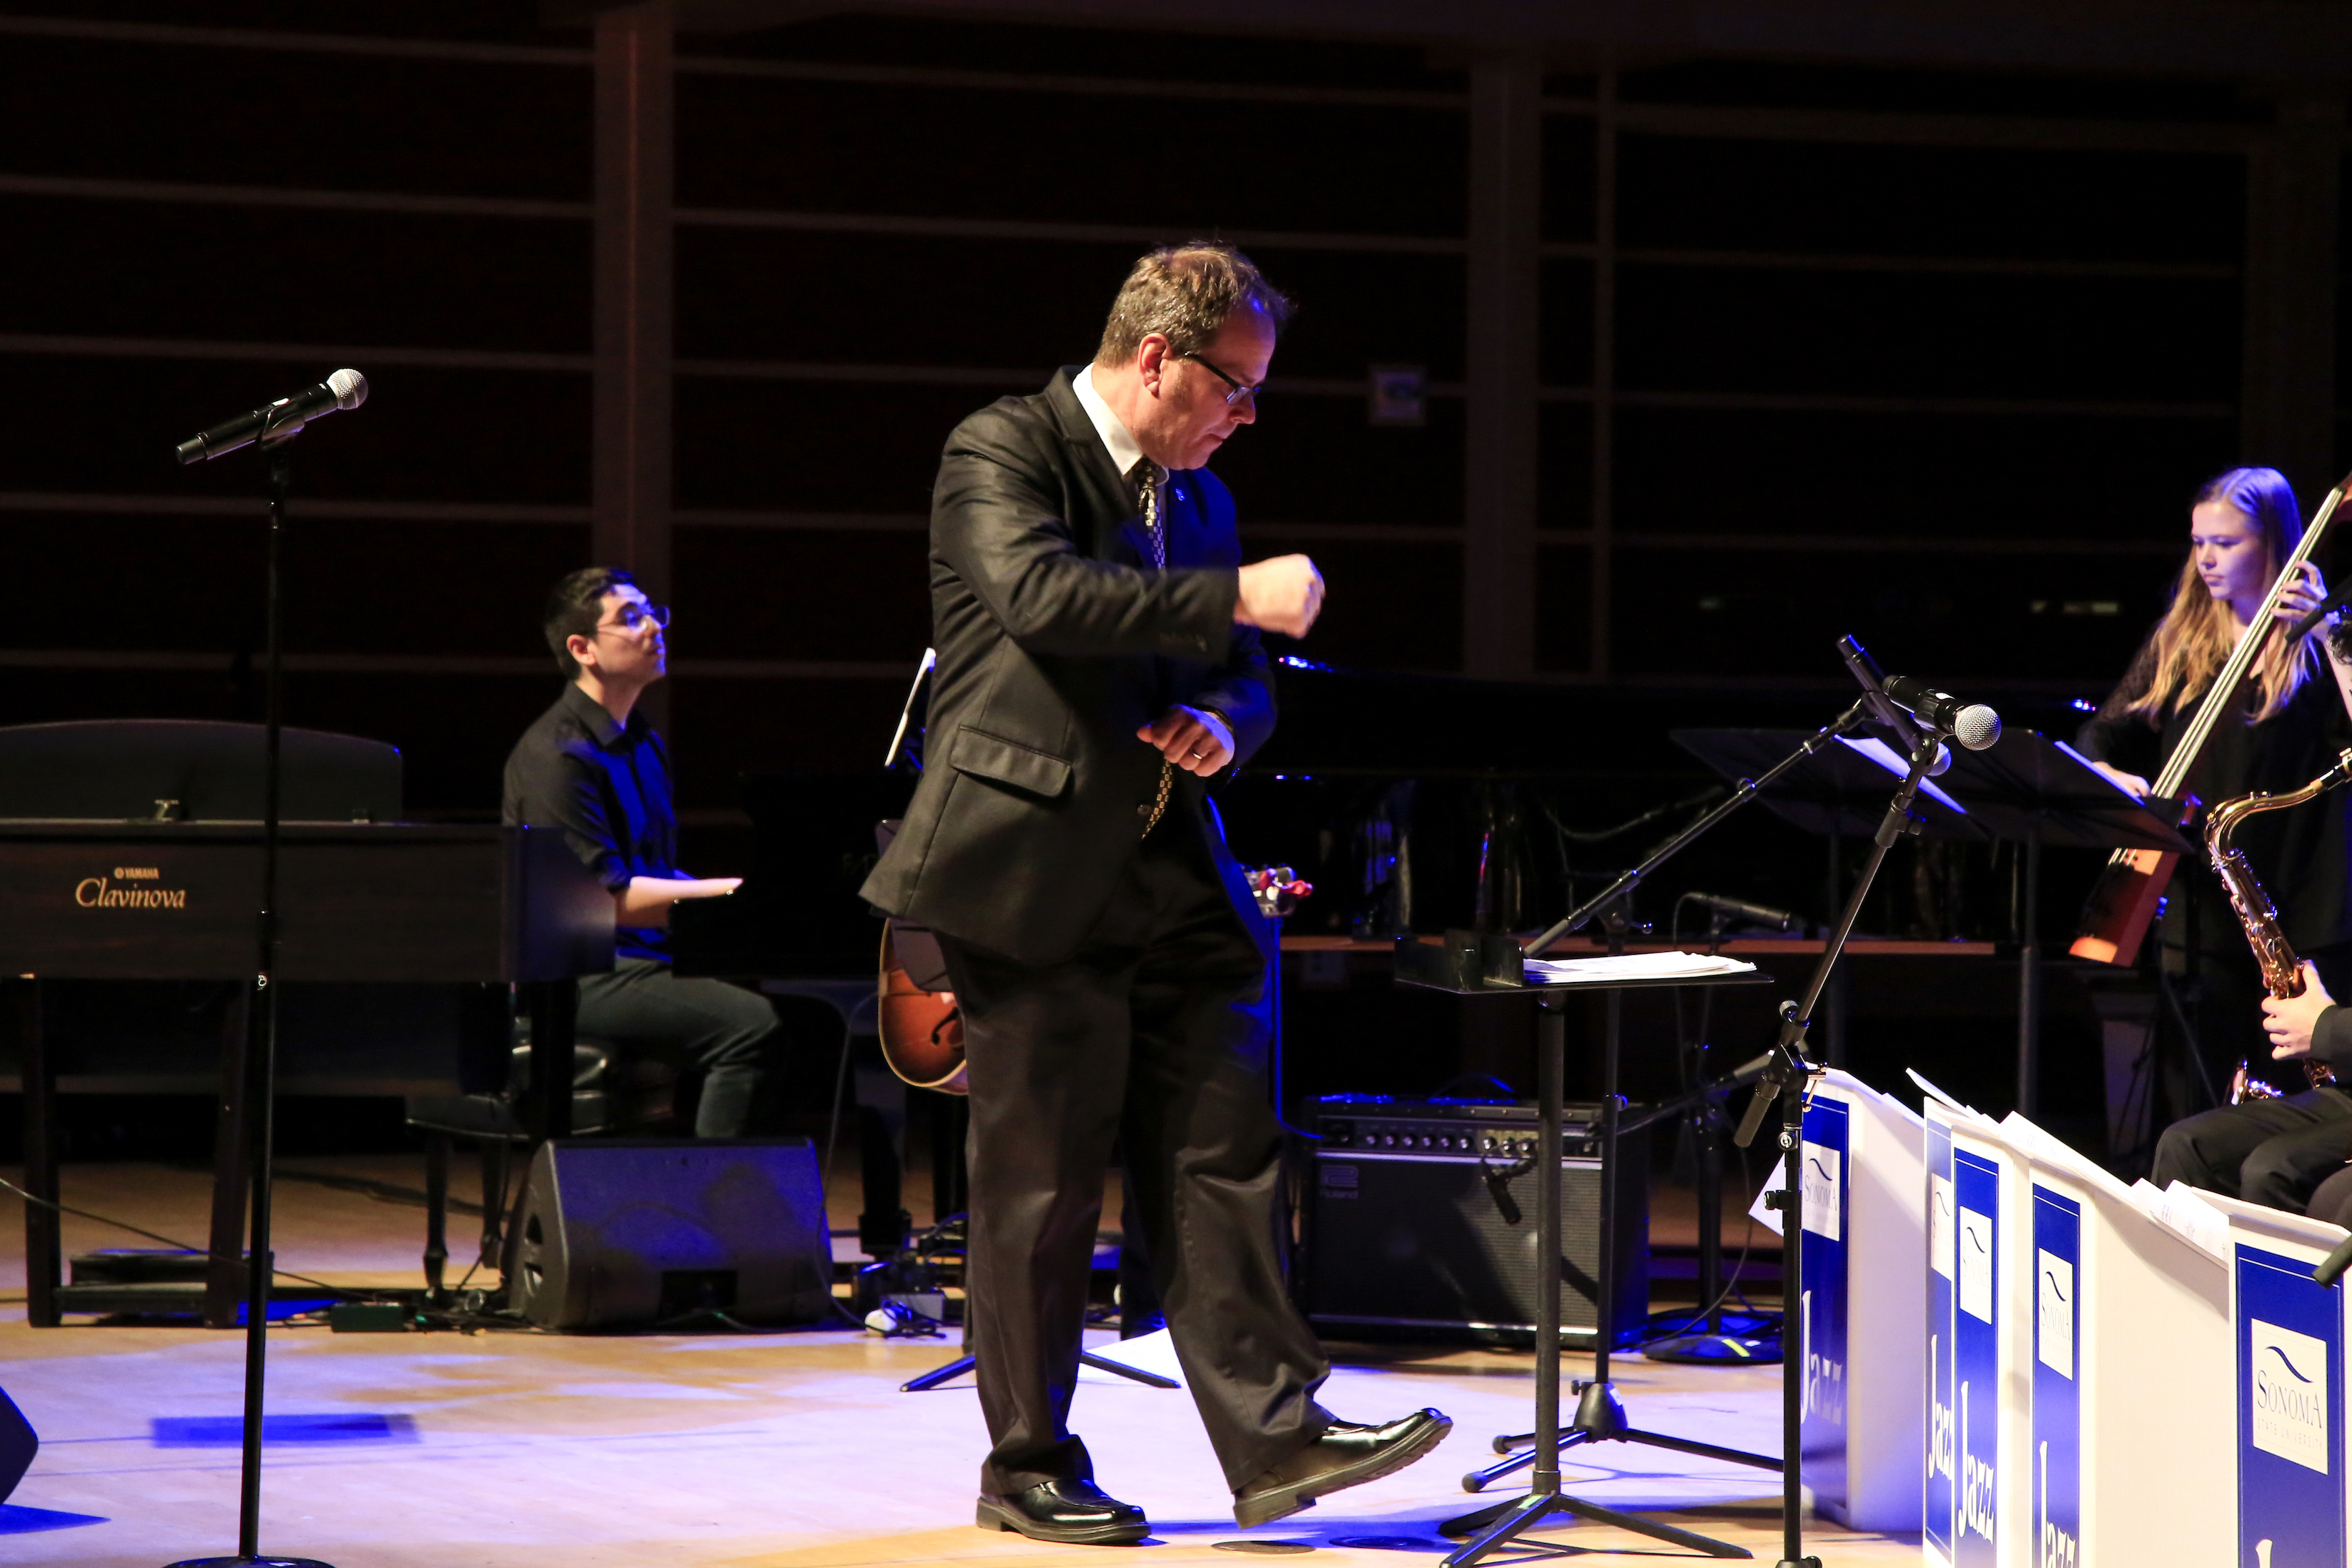 Doug conducting in front of a piano facing the jazz orchestra